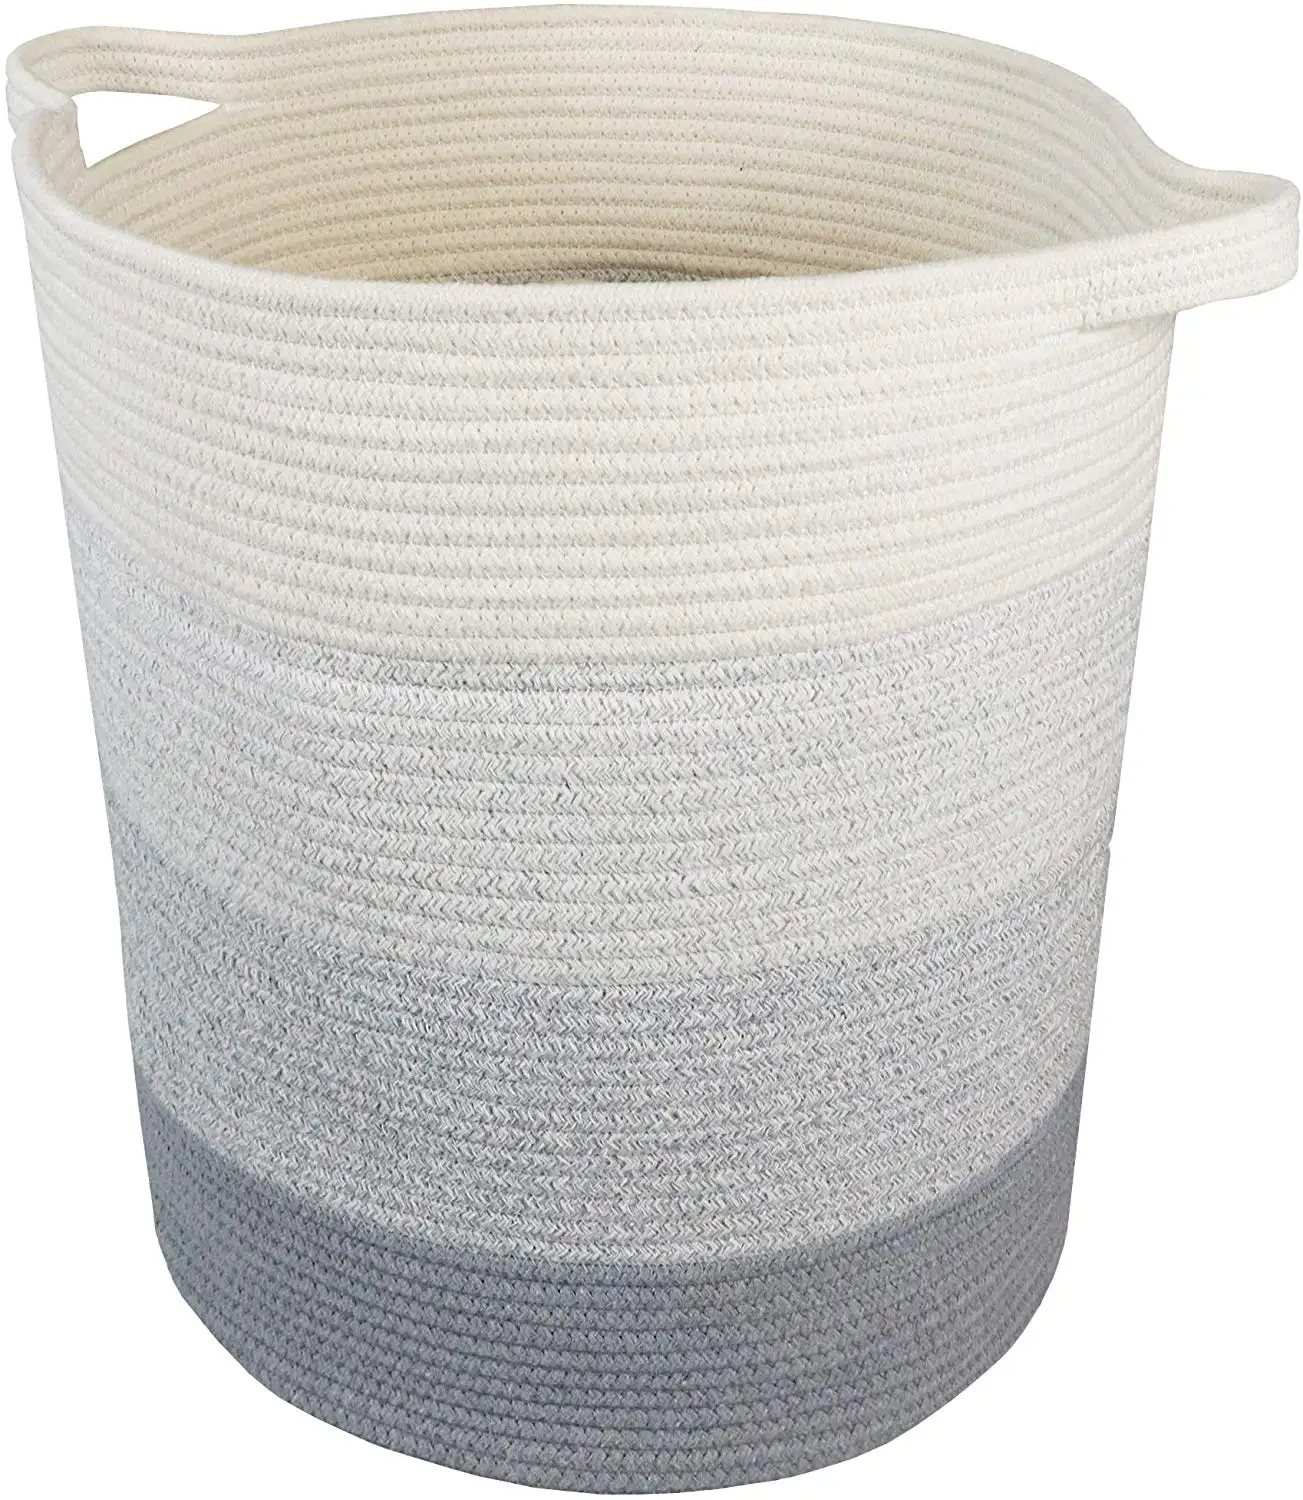 XXL large Woven Cotton Rope Baskets For Baby Toys Custom Cotton Rope Laundry Hamper For Clothes And Blanket